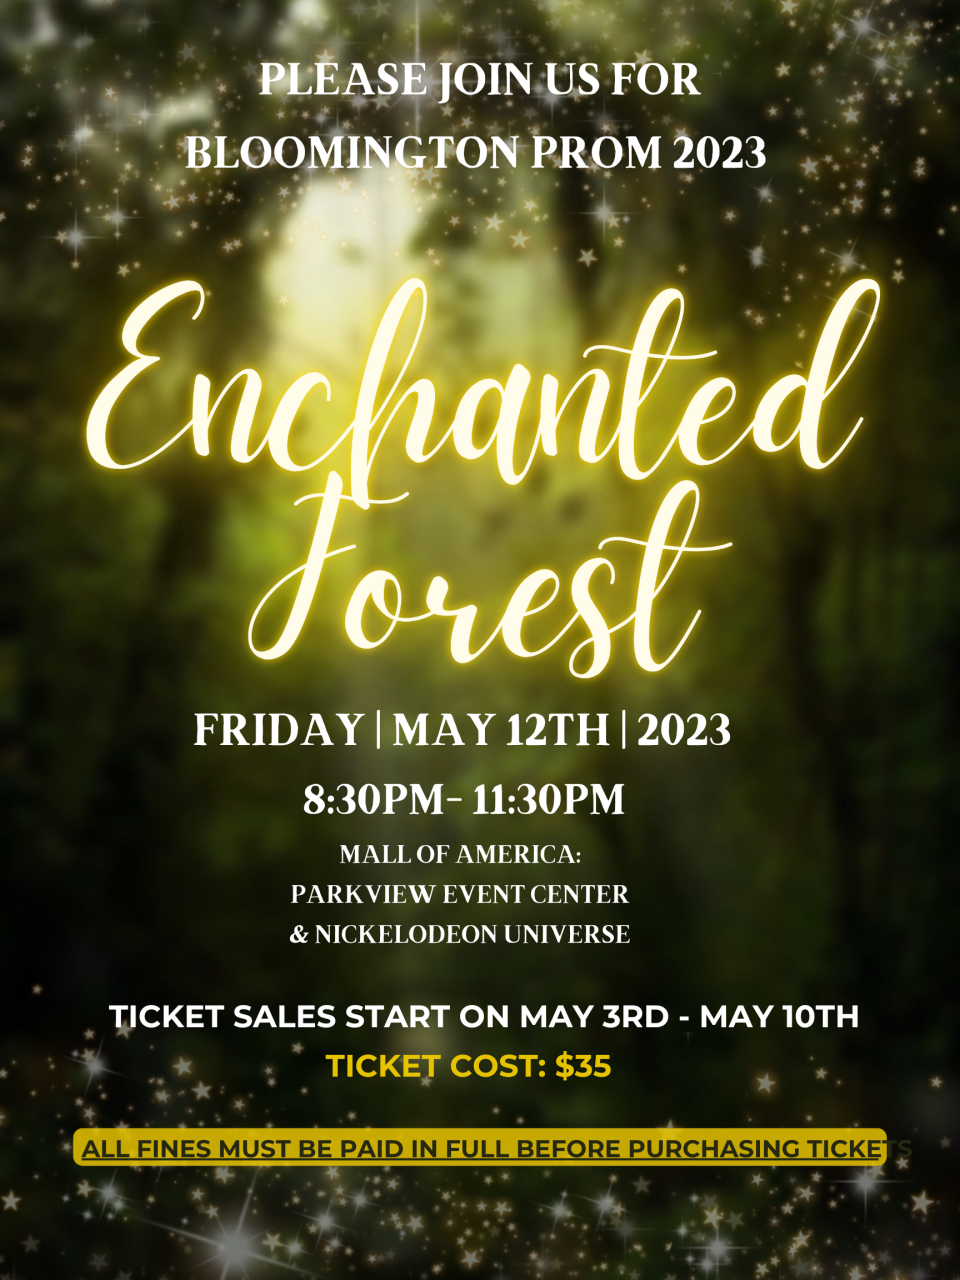 prom 2023, friday may 12th 8:30 - 11:30 pm, mall of america